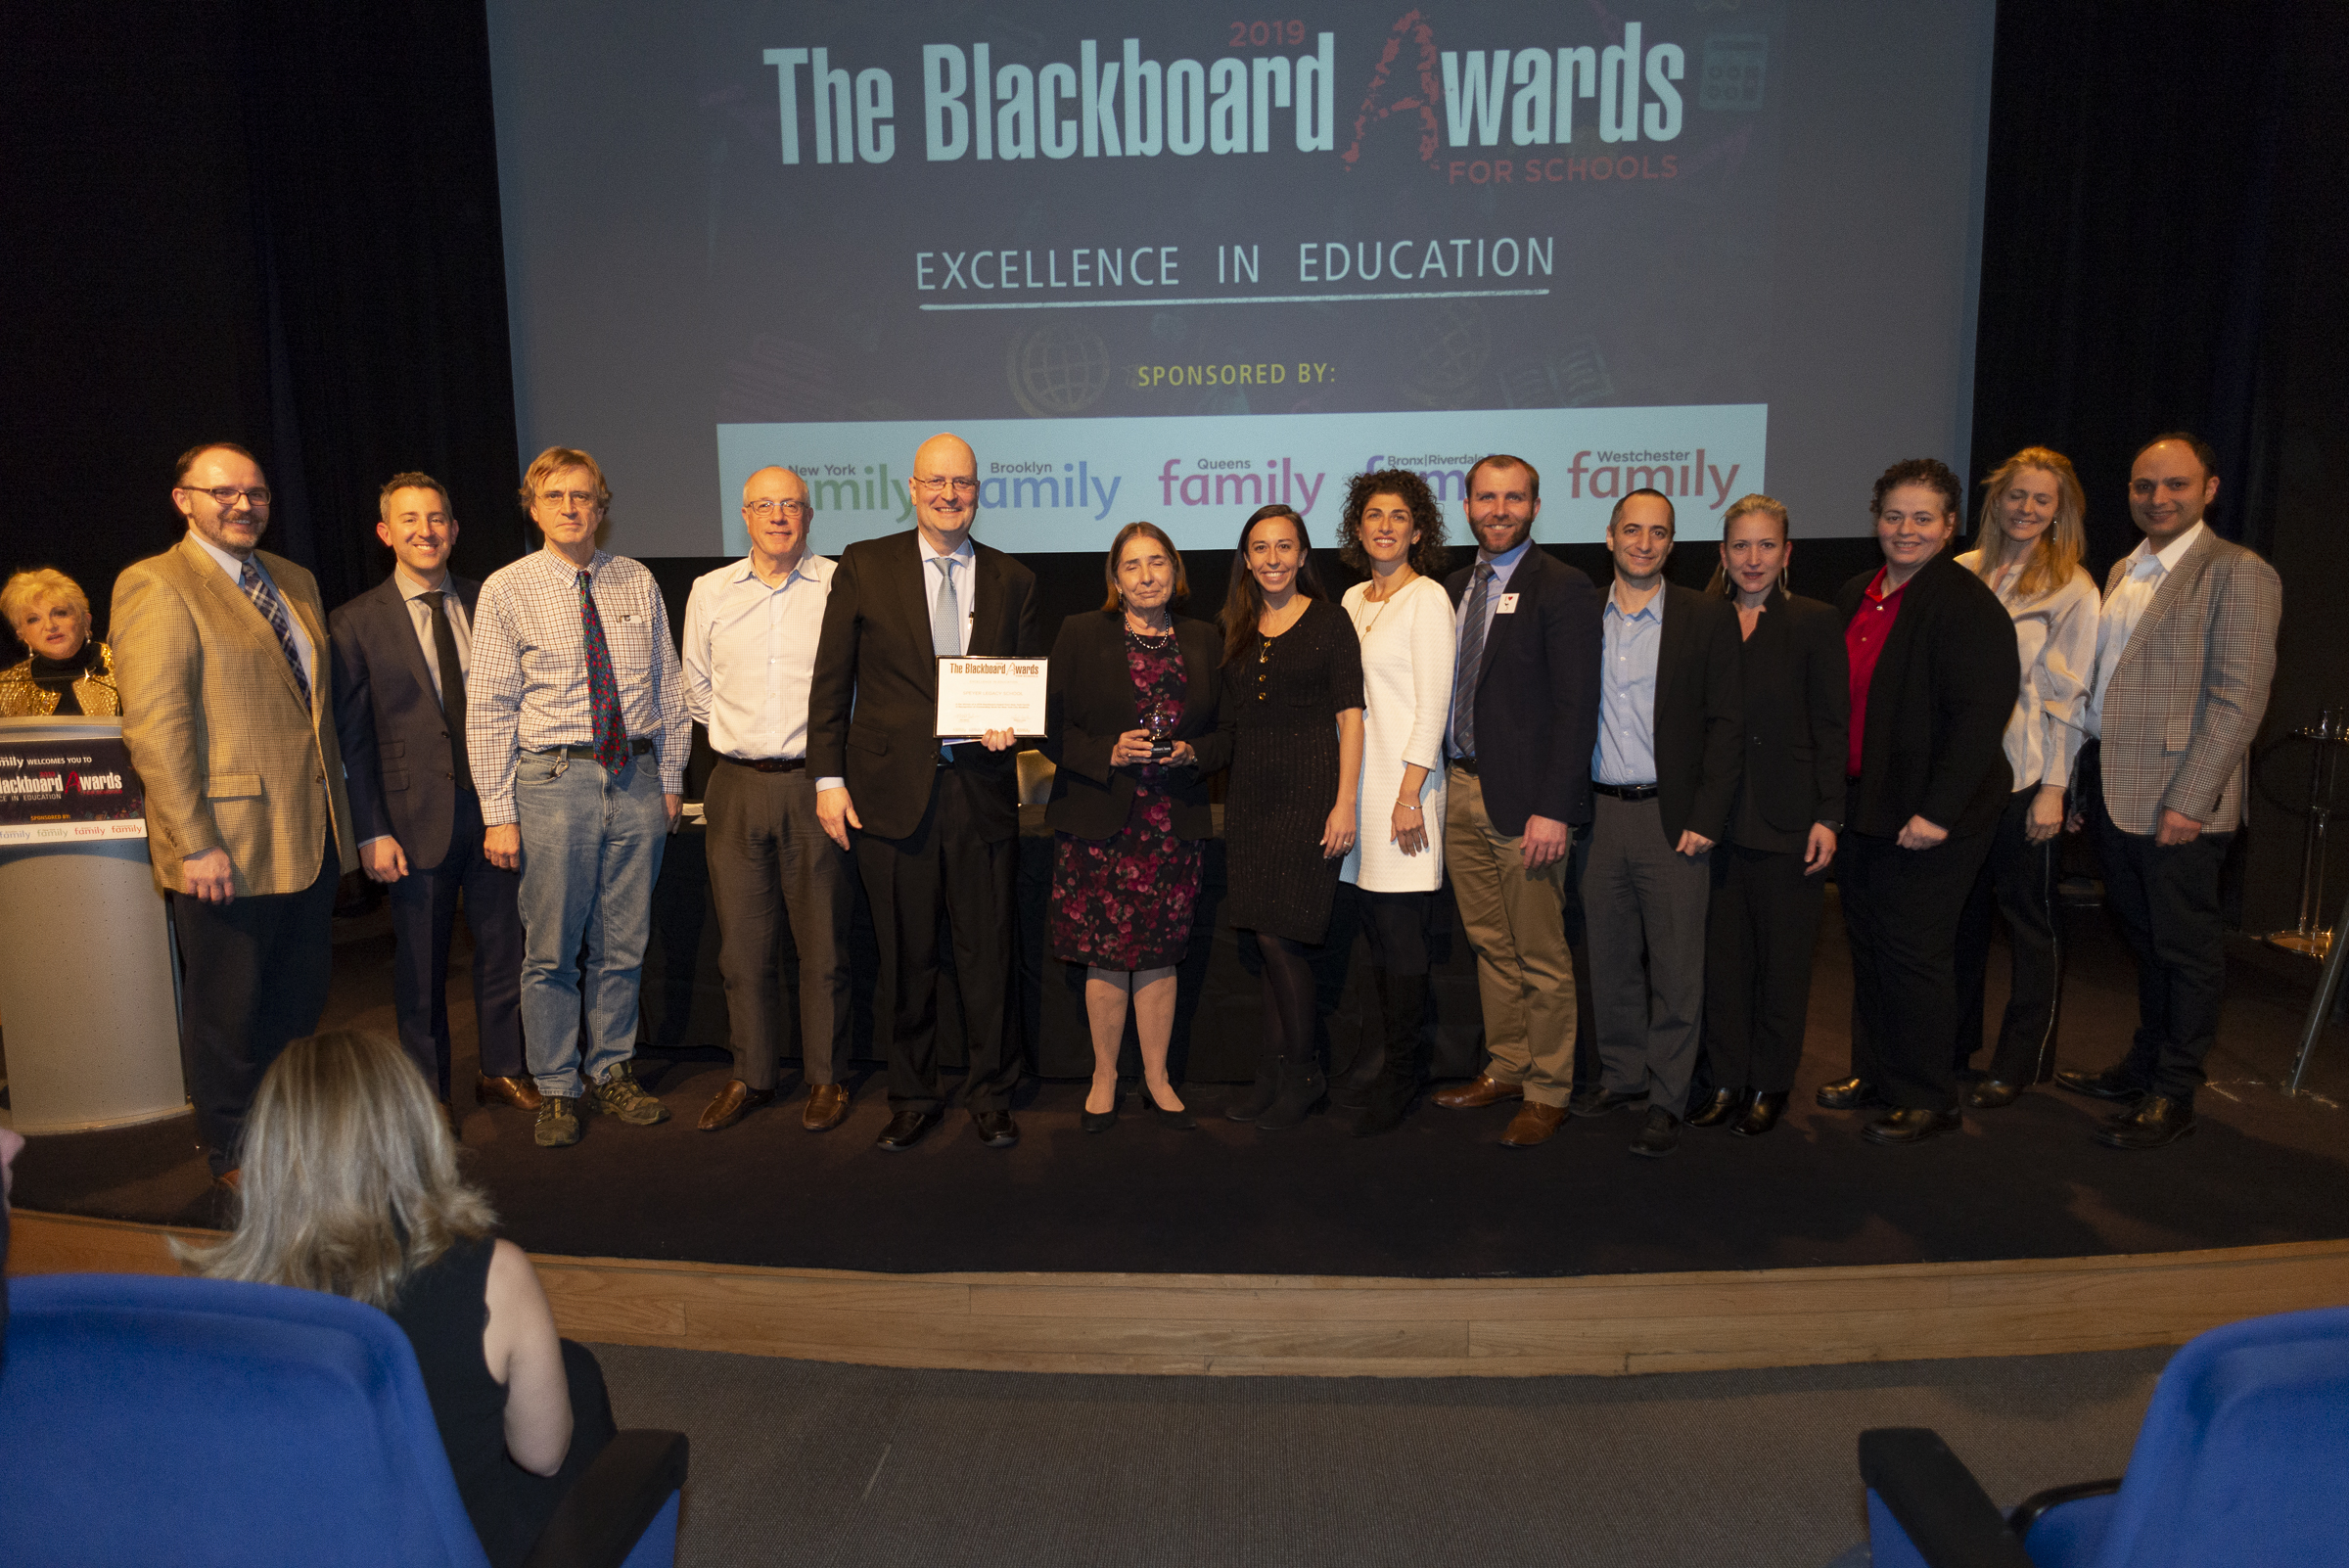 The 2019 Blackboard Awards for Schools and Principals